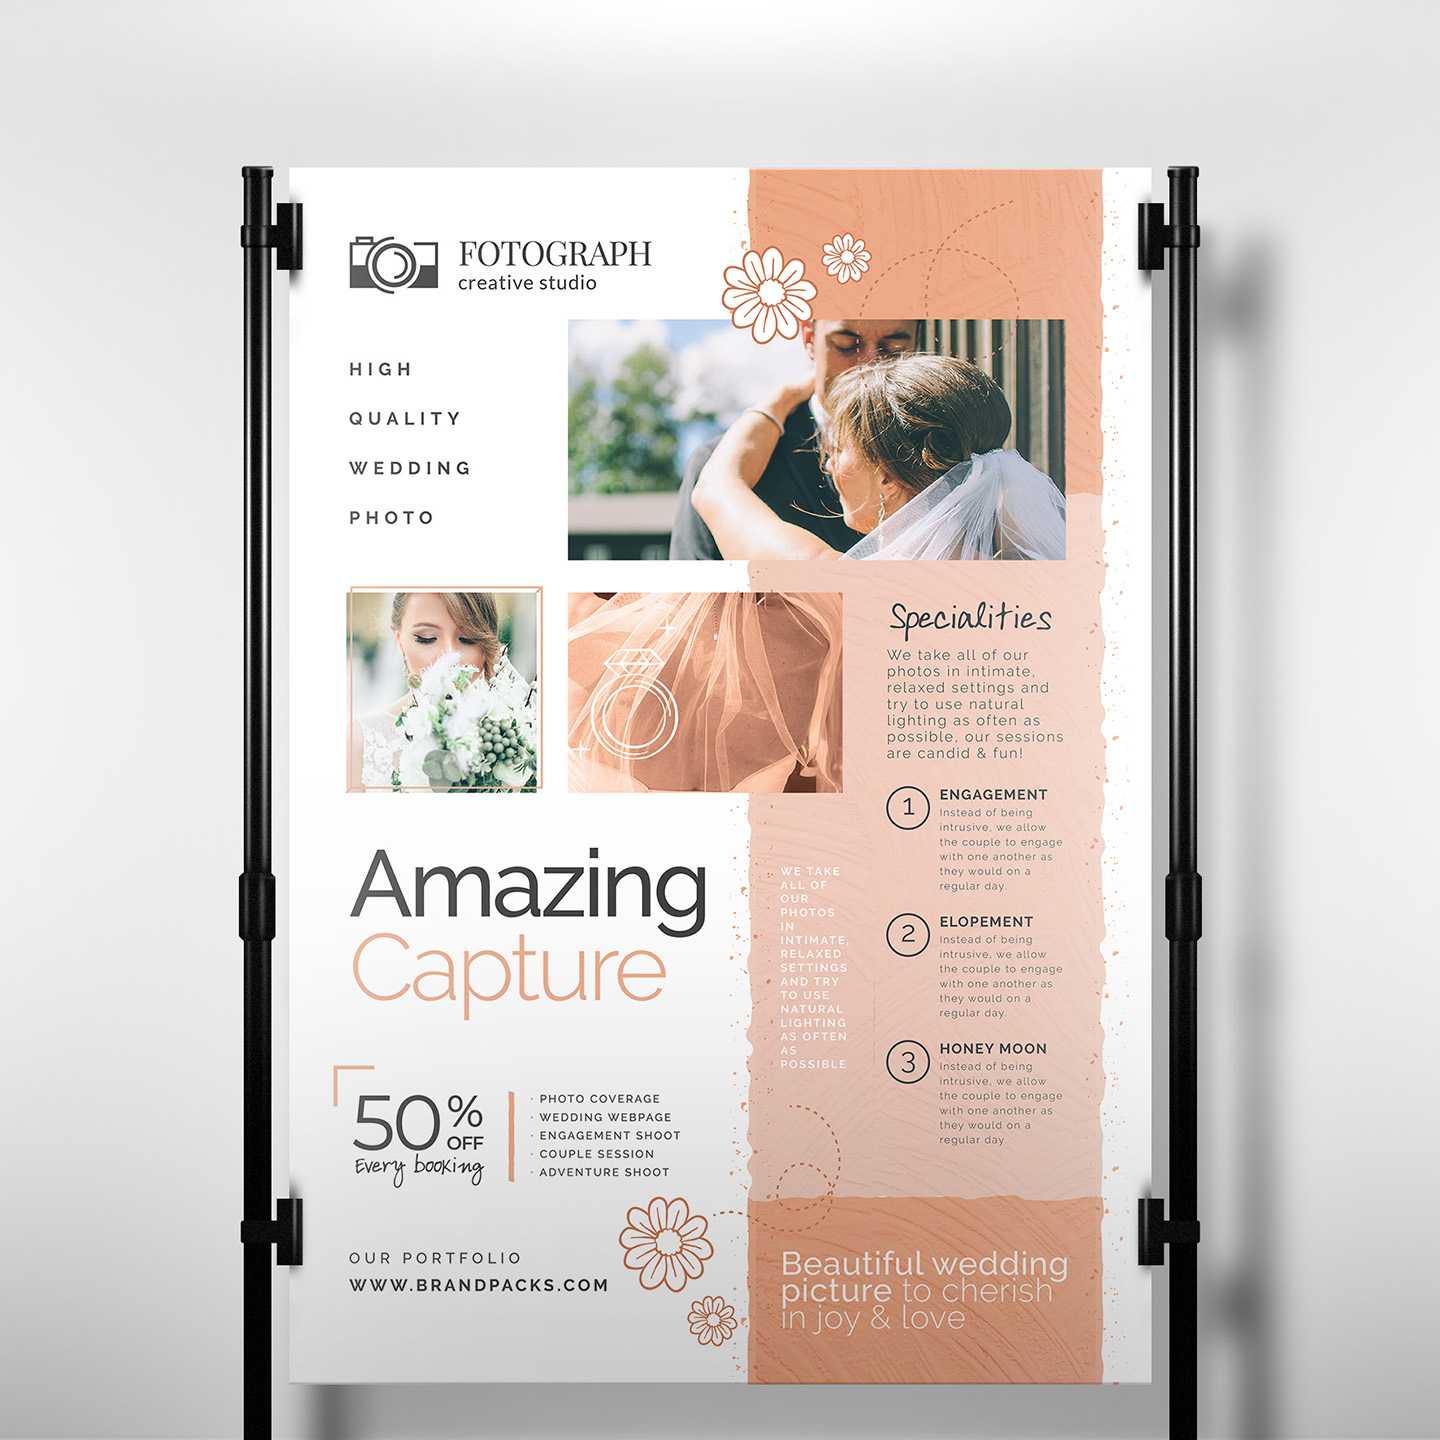 Photography Service Banner Template – Psd, Ai & Vector Throughout Photography Banner Template